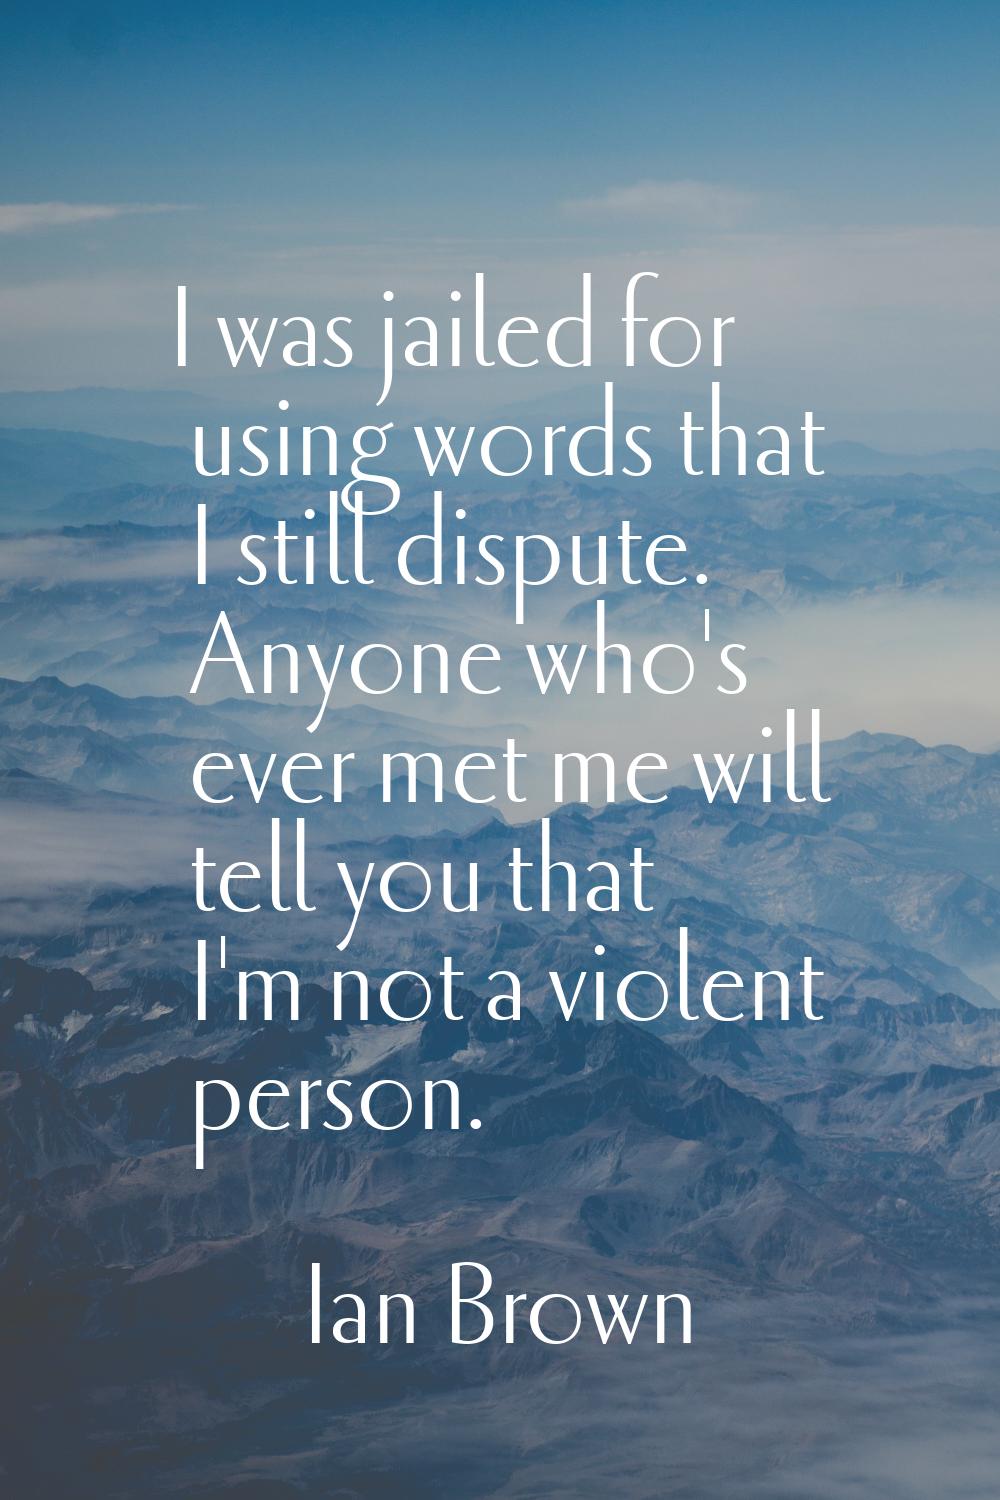 I was jailed for using words that I still dispute. Anyone who's ever met me will tell you that I'm 